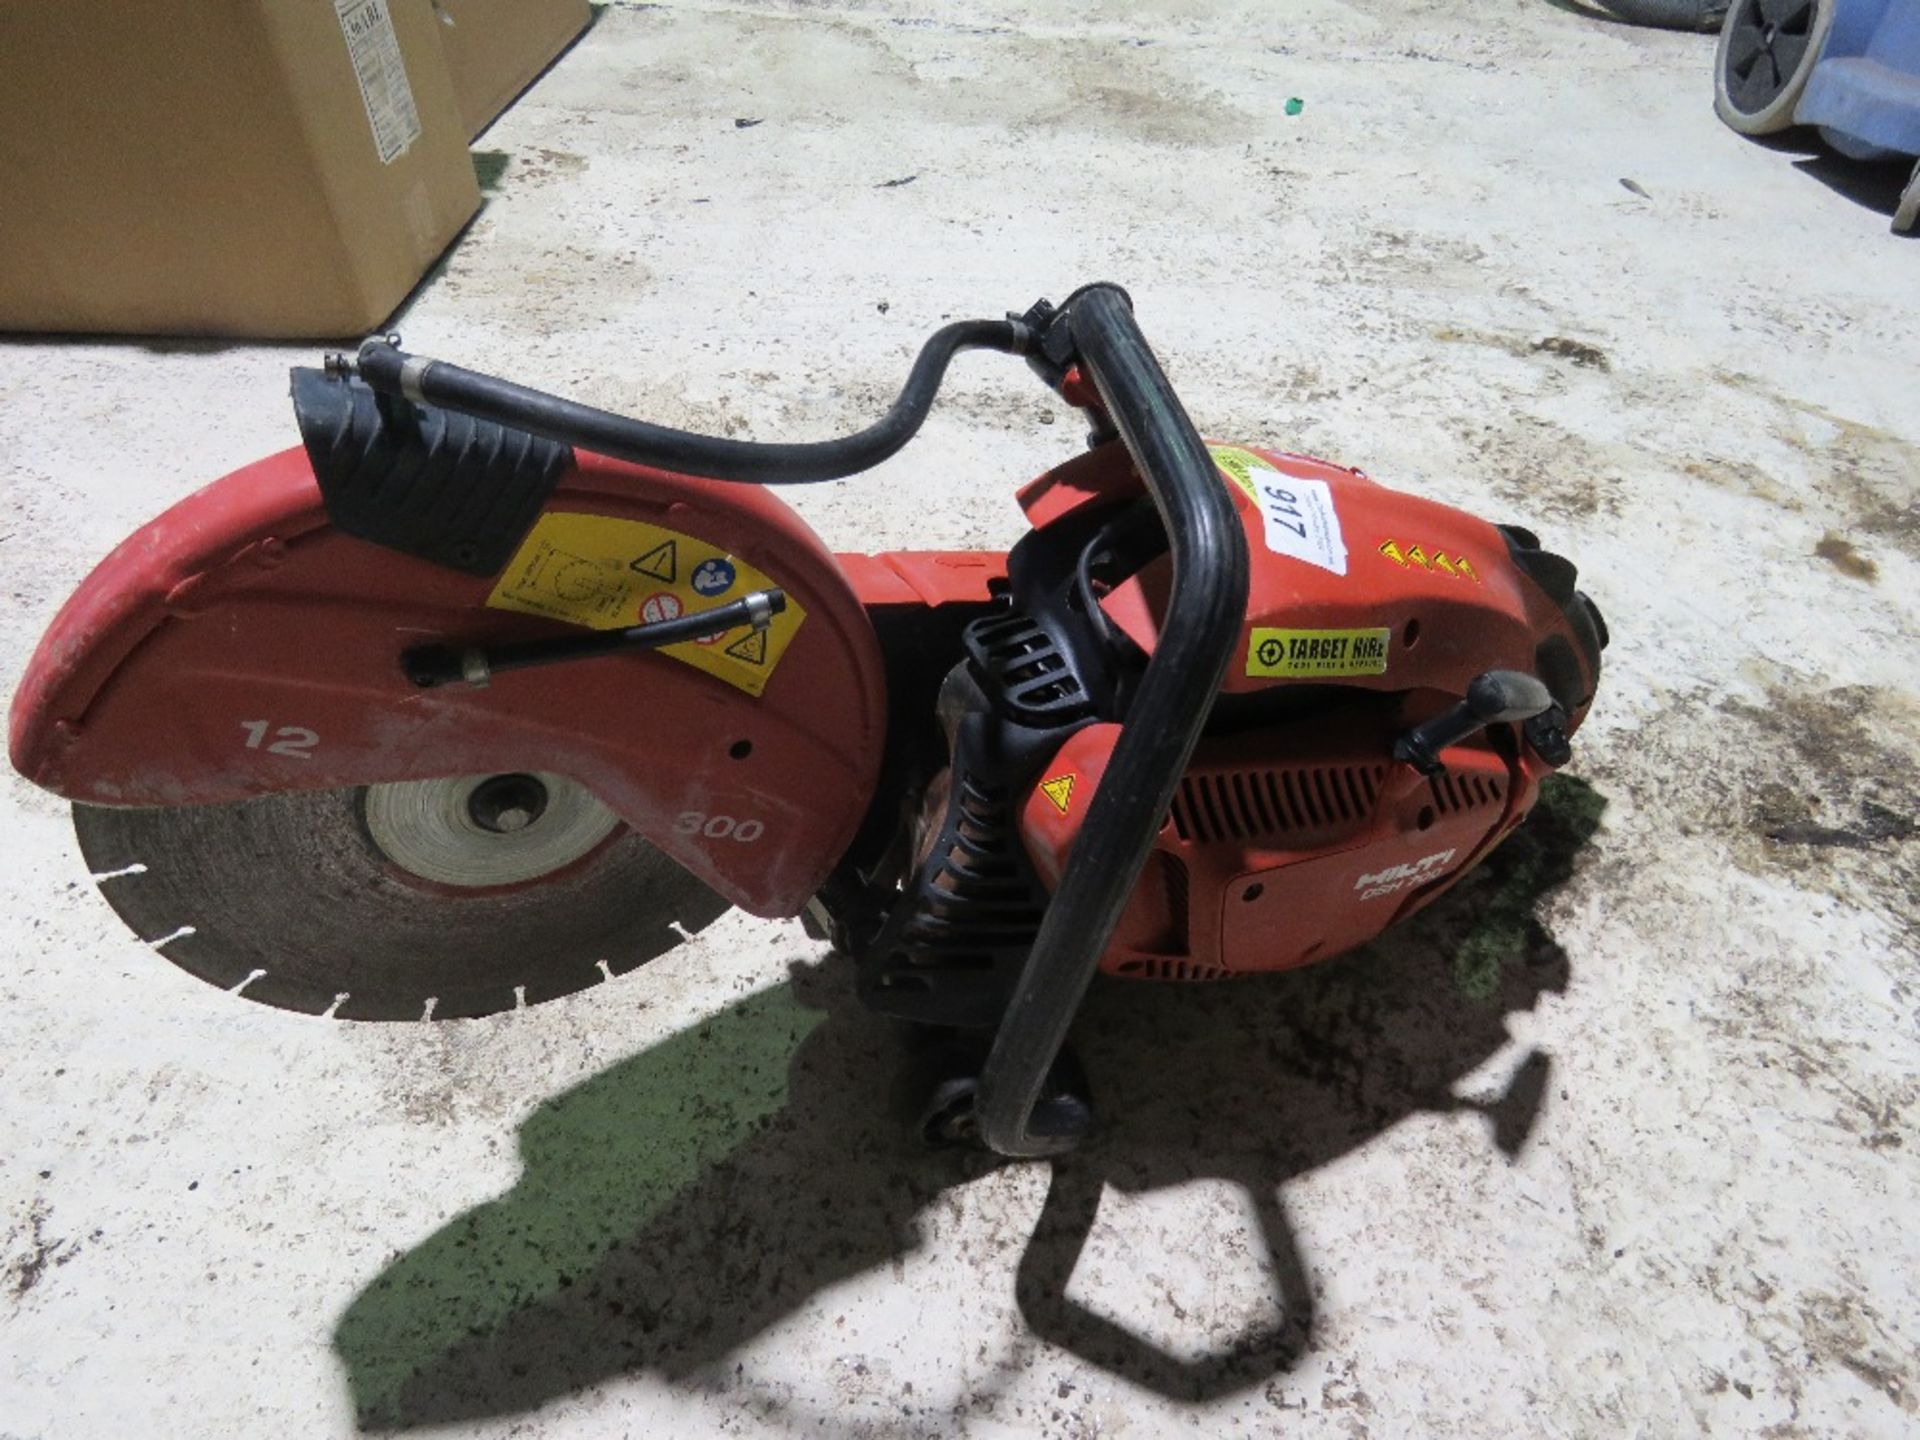 HILTI DSH700 PETROL ENGINED CUT OFF SAW WITH BLADE. SOURCED FROM LOCAL DEPOT CLOSURE. - Image 2 of 3